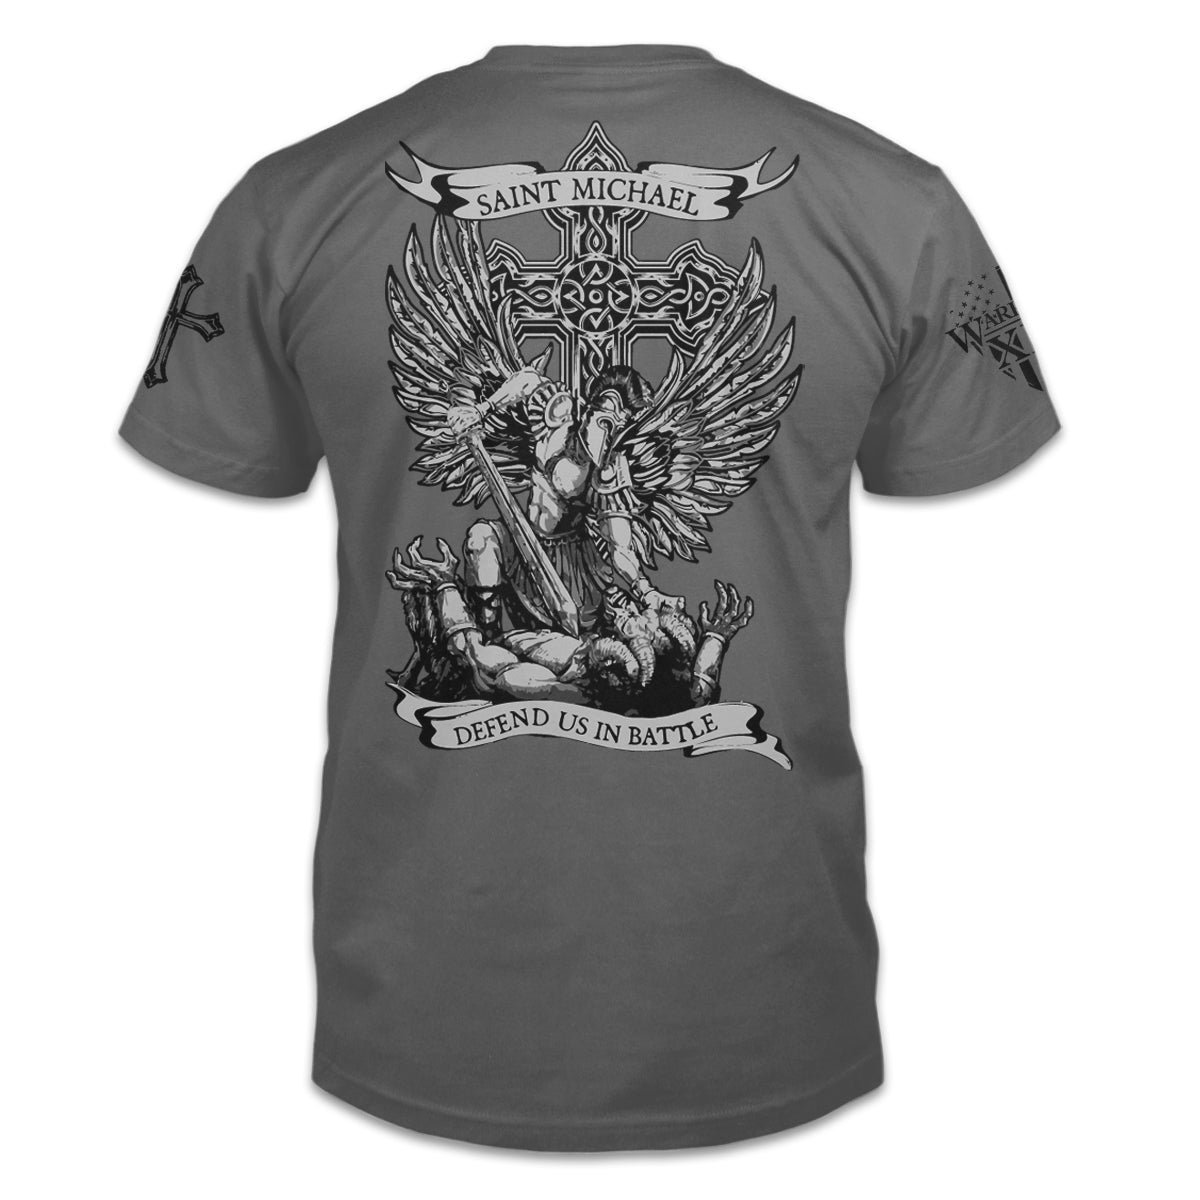 A grey t-shirt with the words "Saint Michael defend us in battle" with Saint Michael Archangel in battle printed on the back of the shirt.